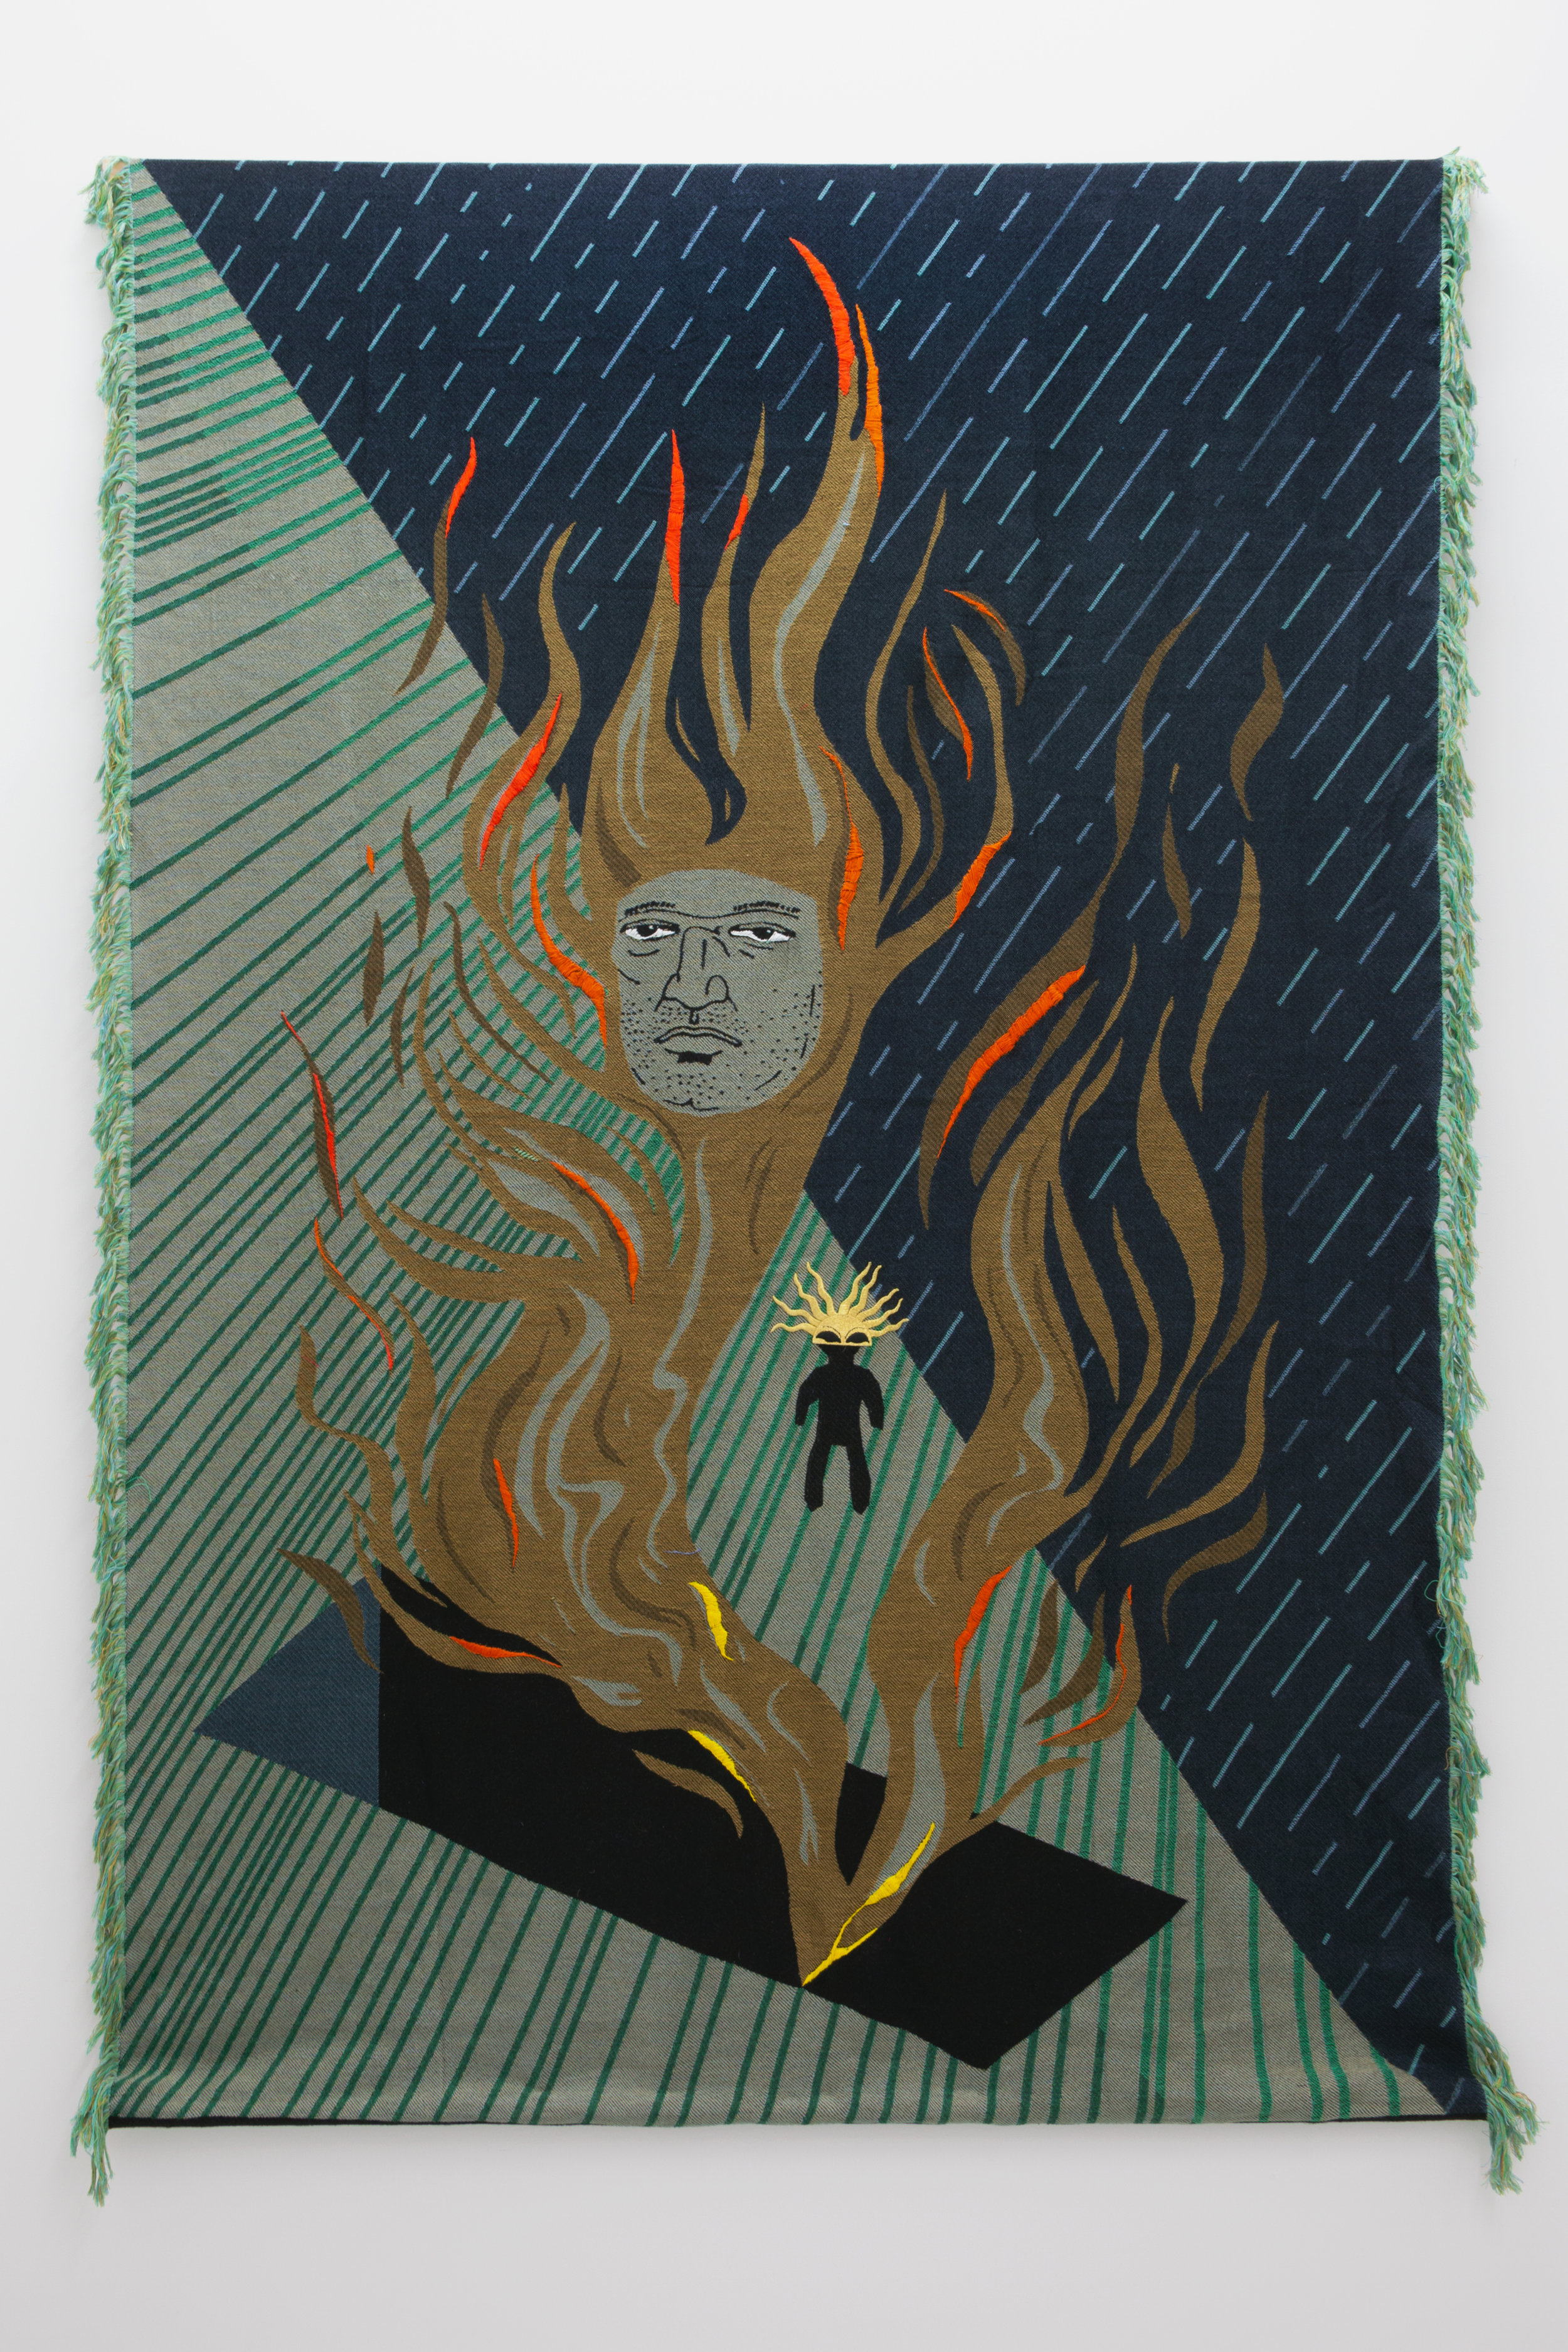  Oona Brangam-Snell,  Flaming Tomb , 2019 Jacquard Tapestry with Hand Embroidery, 67x48x1in 